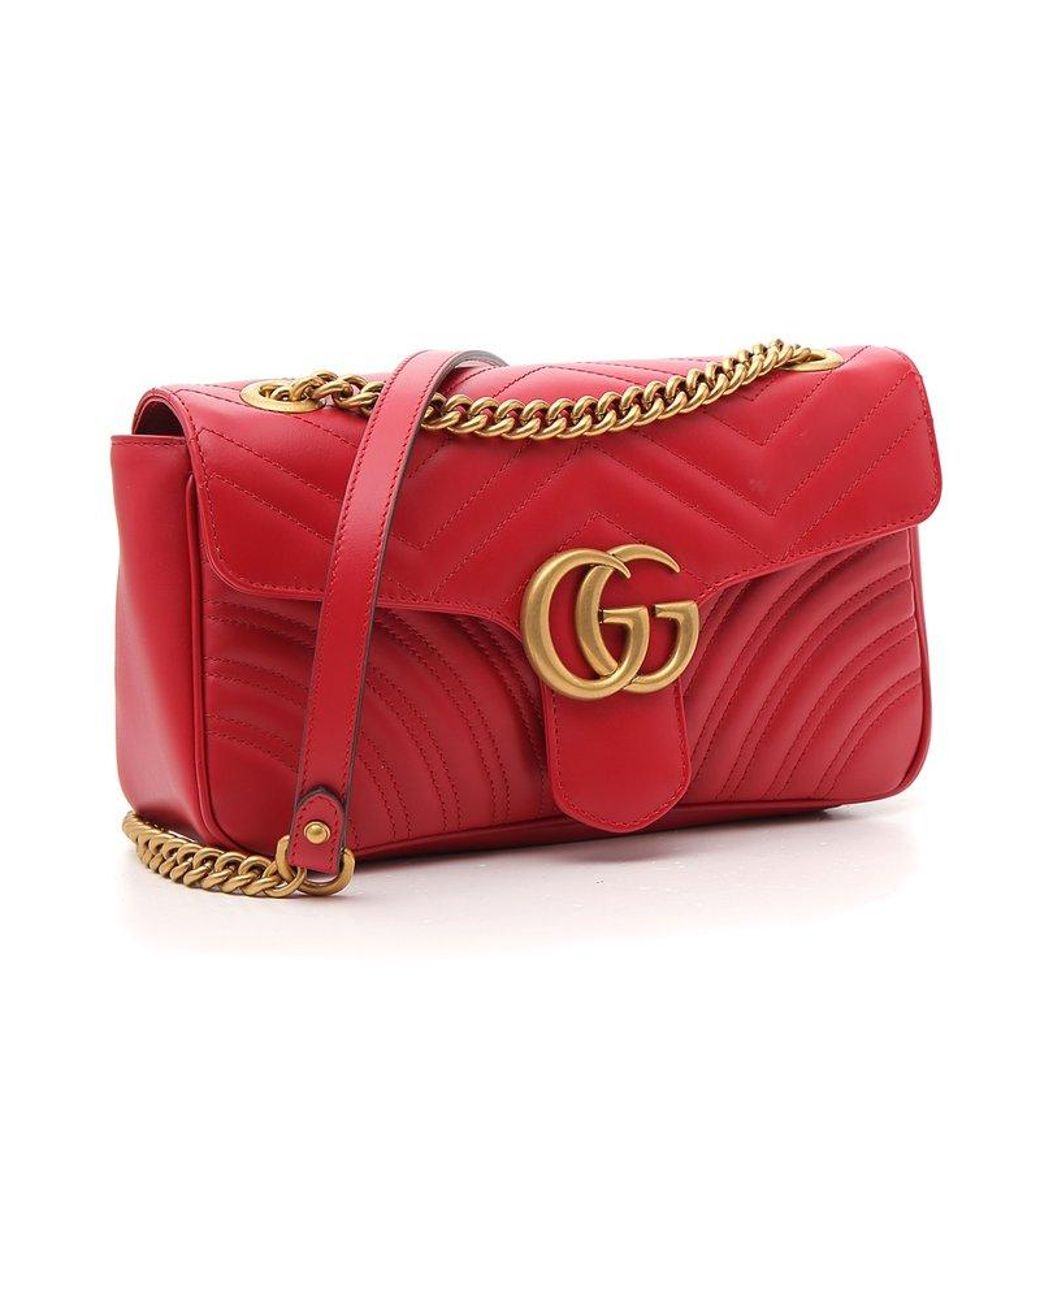 Gucci GG Marmont Small Matelassé Shoulder Bag in Red | Lyst